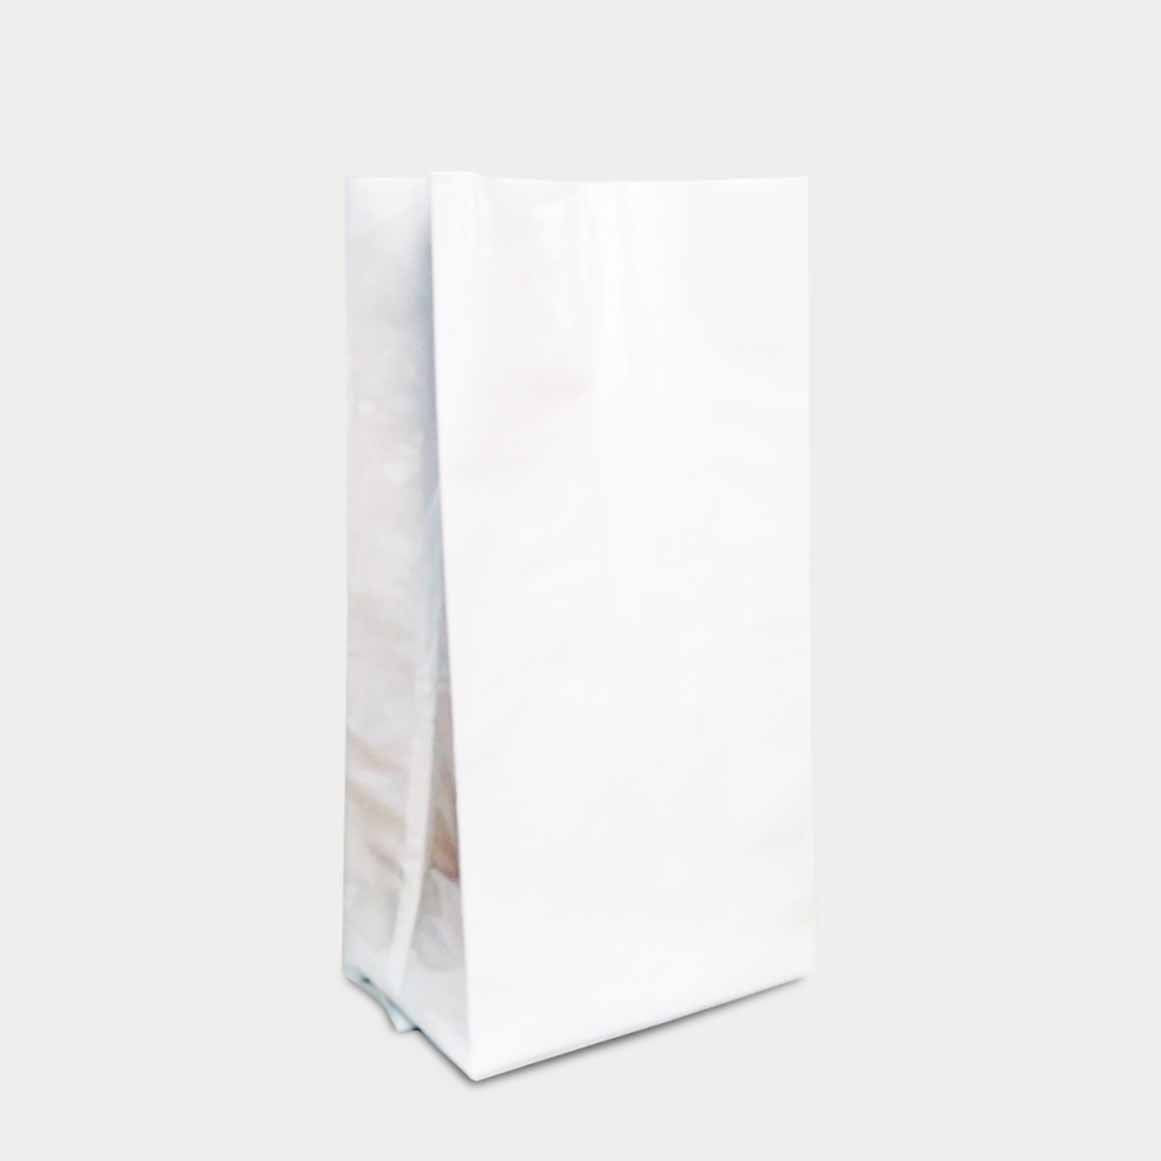 Large Gusseted Paper Bags, 6 x 3.5 x 11, White, 100/Pack - HYG66101, Hygloss Products Inc.